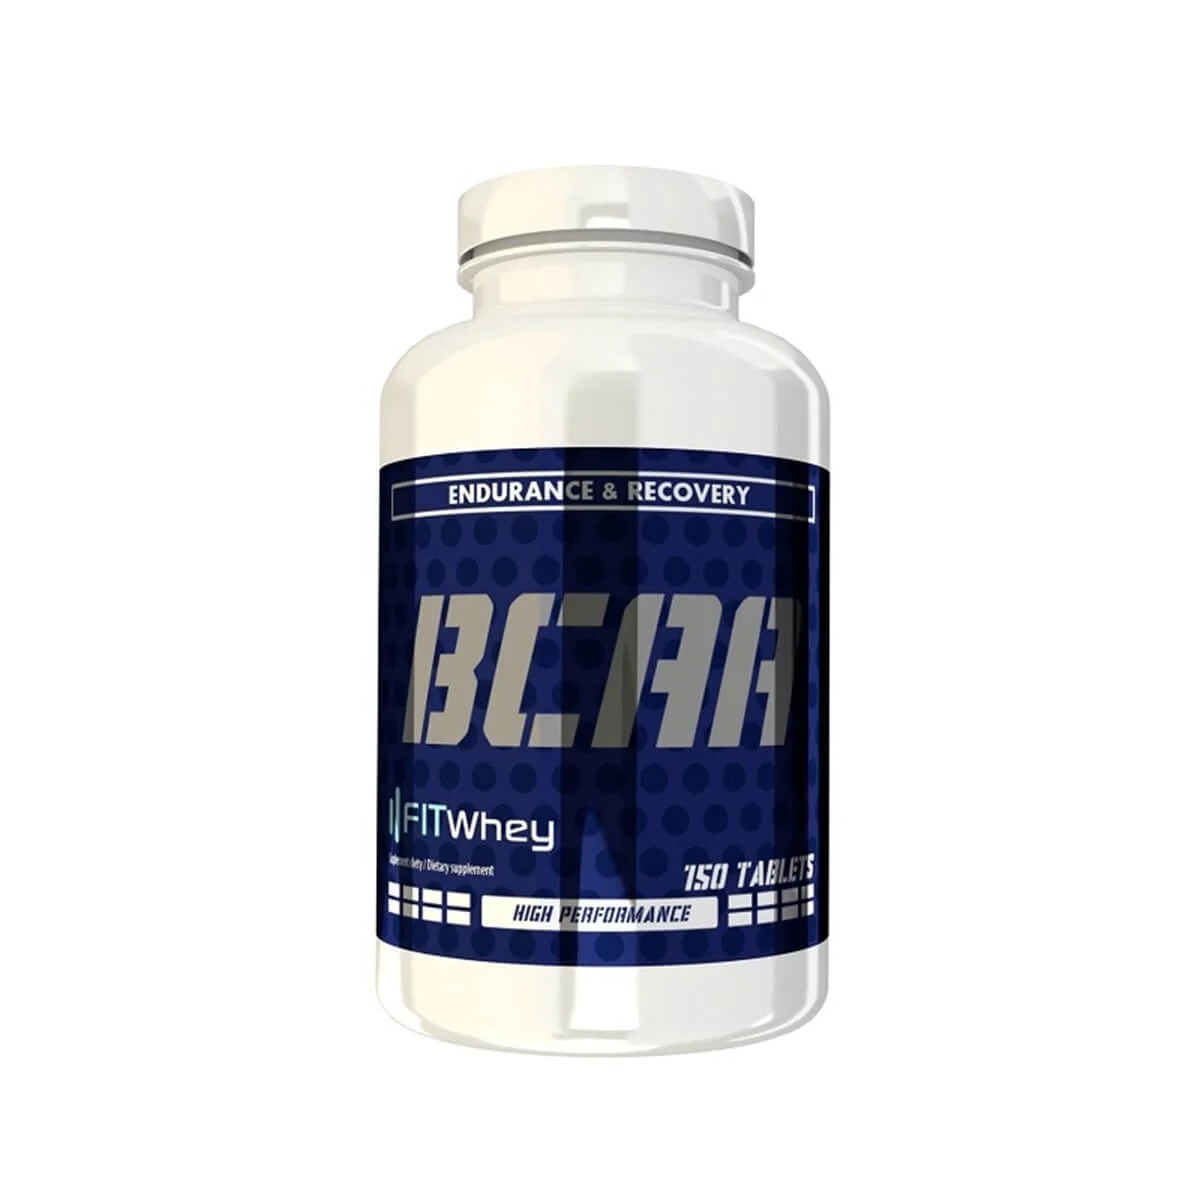 FITWhey Bcaa 150 tablets